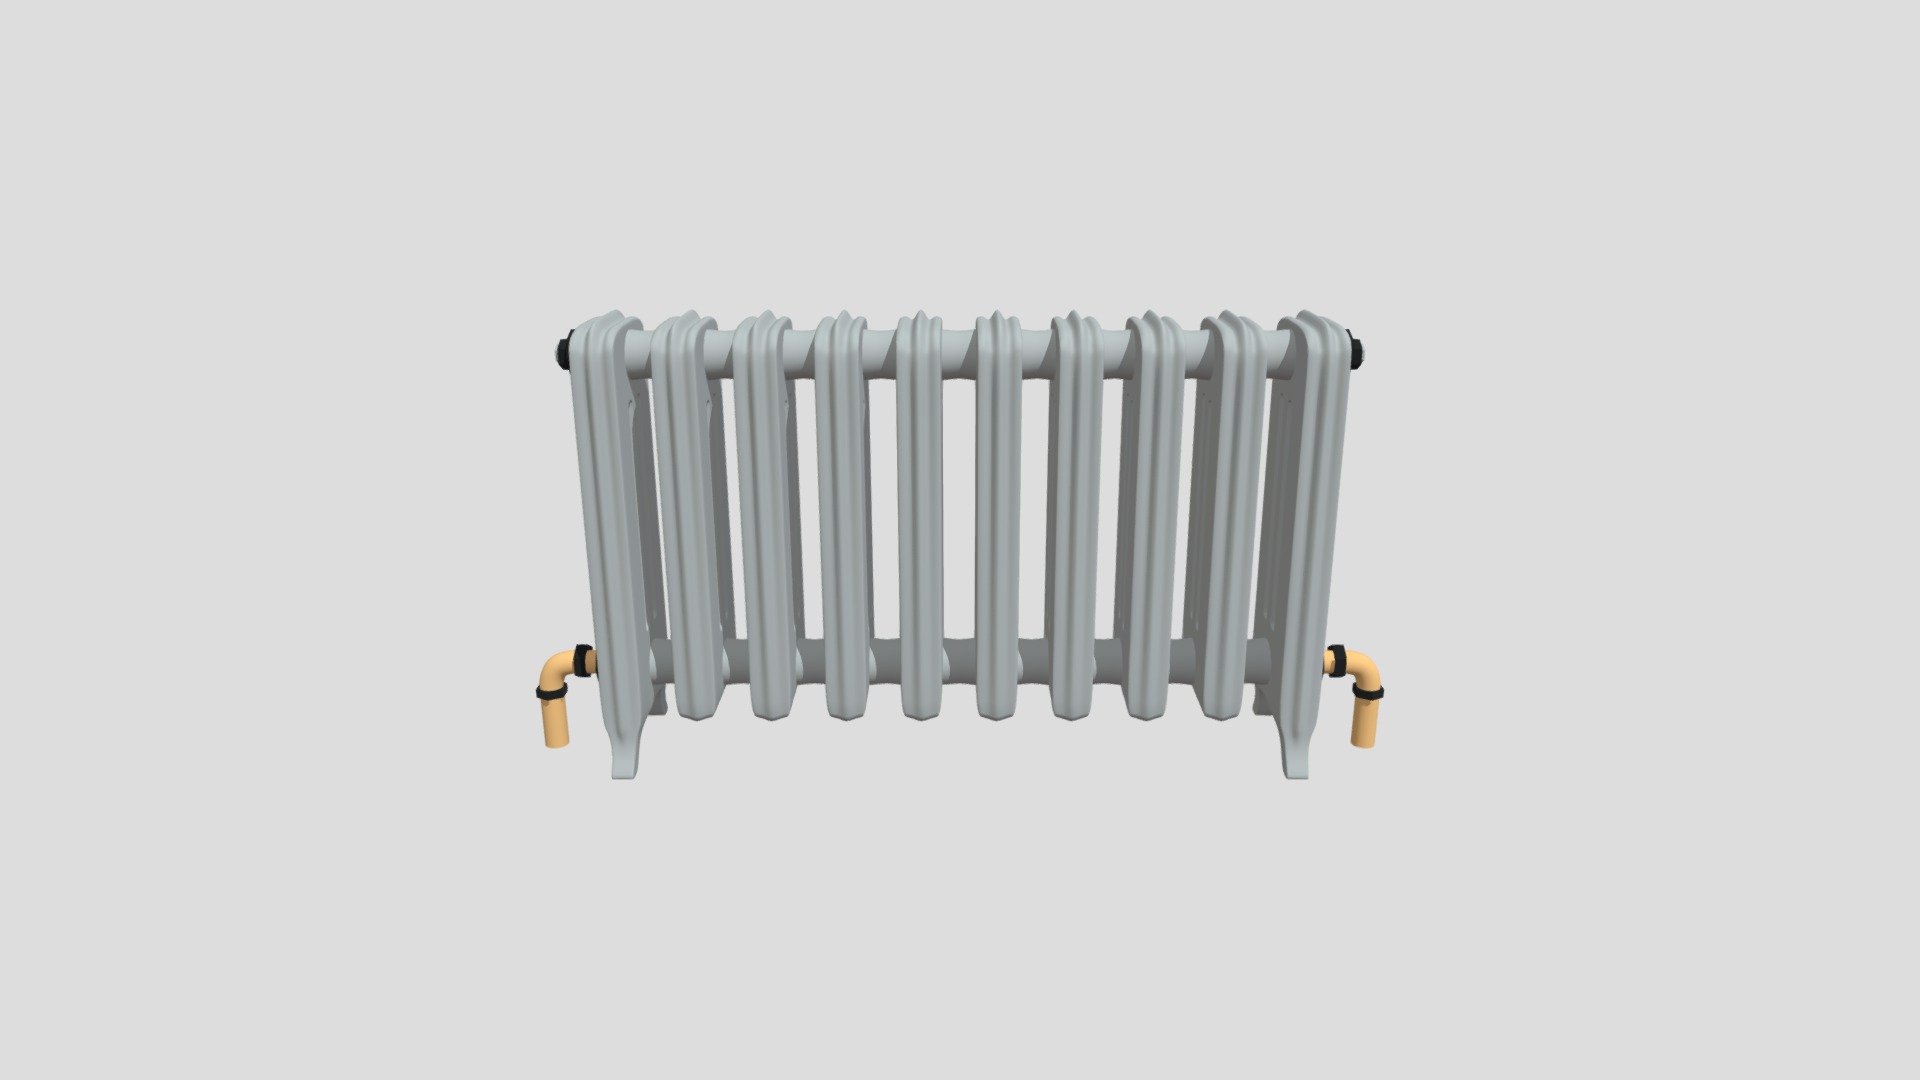 LAOMUSIC ARTS 2023

presents

laos Radiator

Features:
- High quality polygonal model
- render with V-Ray in 3ds Max/Maya &amp; C4D
- V-ray &amp; Standard material 
- Model has all materials applied
- all parts and materials renamed
- suitable for close up render
- scene include IBL lighting used in the preview
- display unit scale : metric (cm)

36 Objects
Polys:
158762
Vertex:
159540

Size:
Length: 0.21m
Width: 1.12m
Height: 0.57m

File formats:
- Autodesk Max 2018.4 V-Ray 3.6
- Autodesk Maya 2018.5 -VRay 3.6
- C4D R19 V-RayForC4D 3.6
- Autodesk FBX 2018.1
- OBJ
- SketchUp 2017
- Blender 2900/Eevee
- textures included

Notes:

The preview images were rendered on 3ds Max 2018 with V-ray.
Poly and vertex count does include the backdrop wall.
Enjoy and thanks for your interest !
Also check out our other models by clicking on the user name! - laos Radiator - 3D model by LAOMUSIC ARTS (@laomusicArts) 3d model